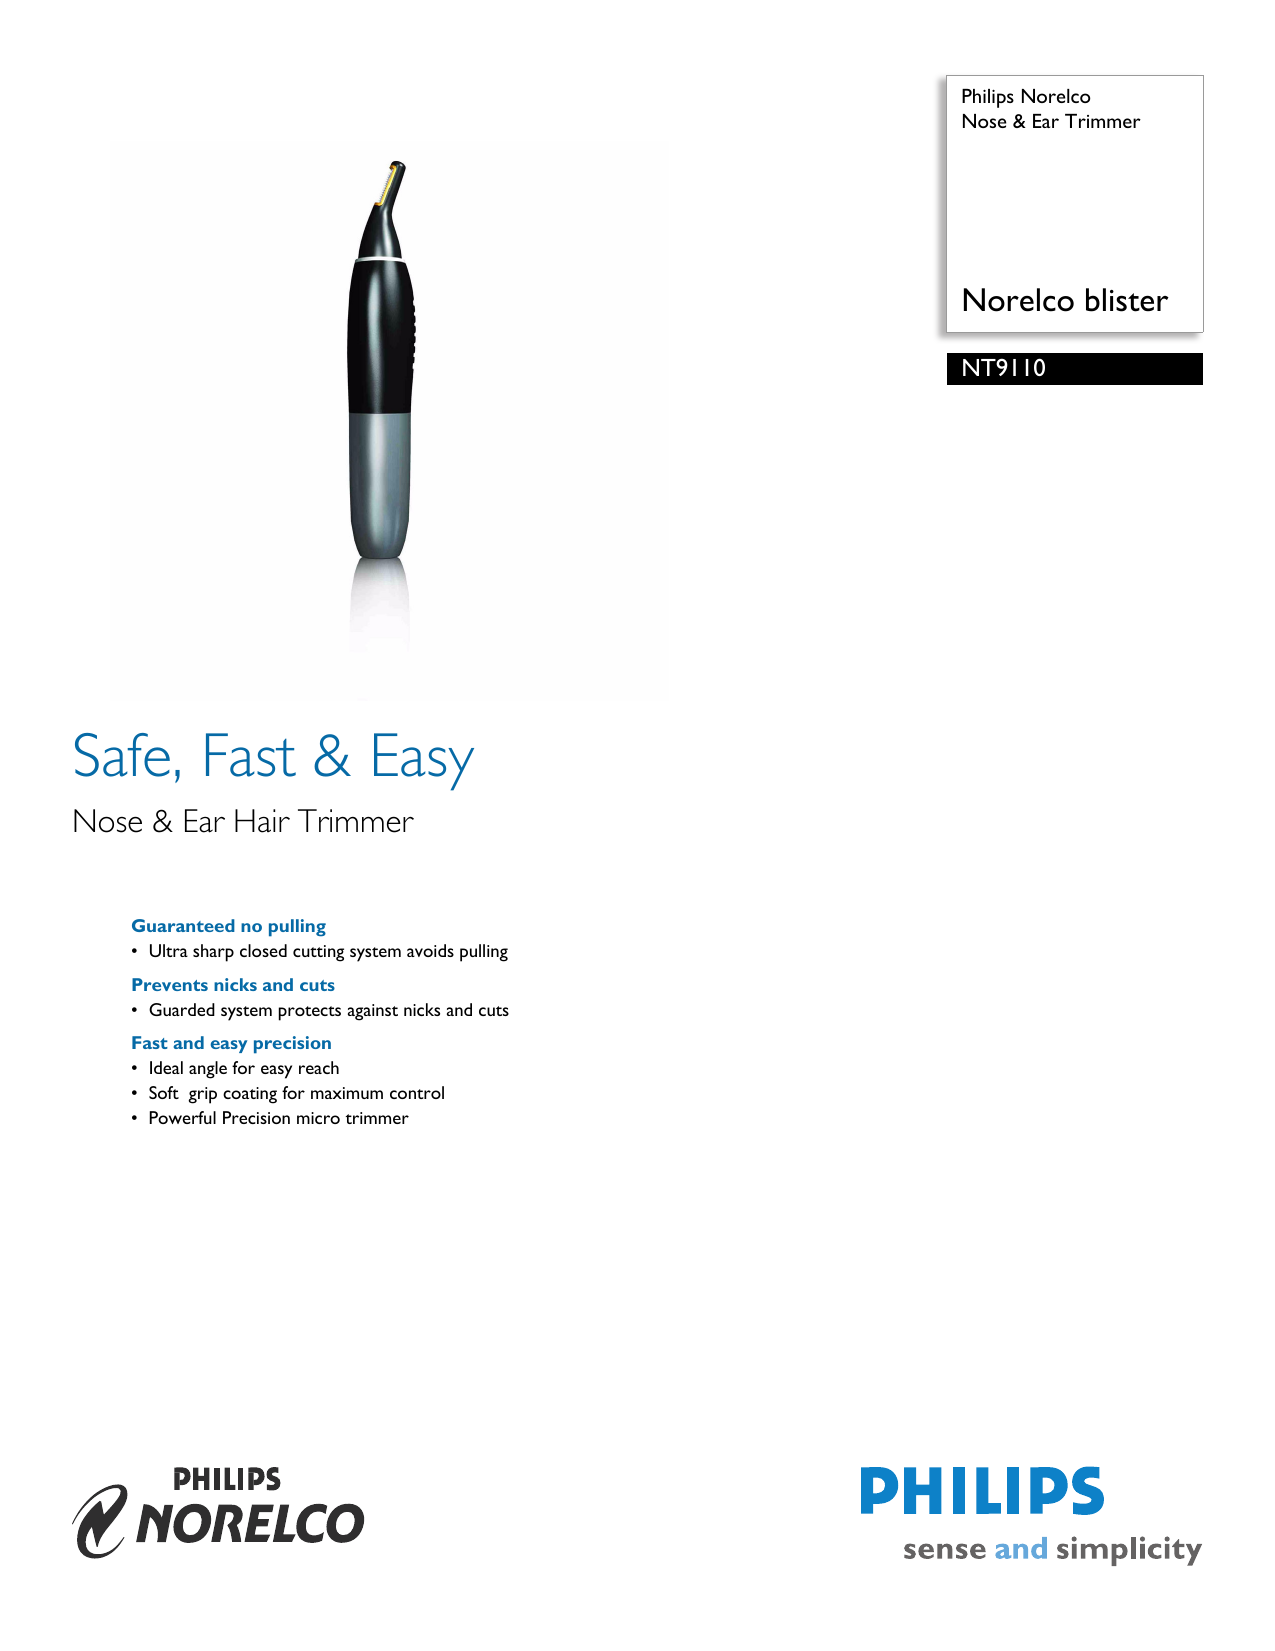 philips micro trimmer